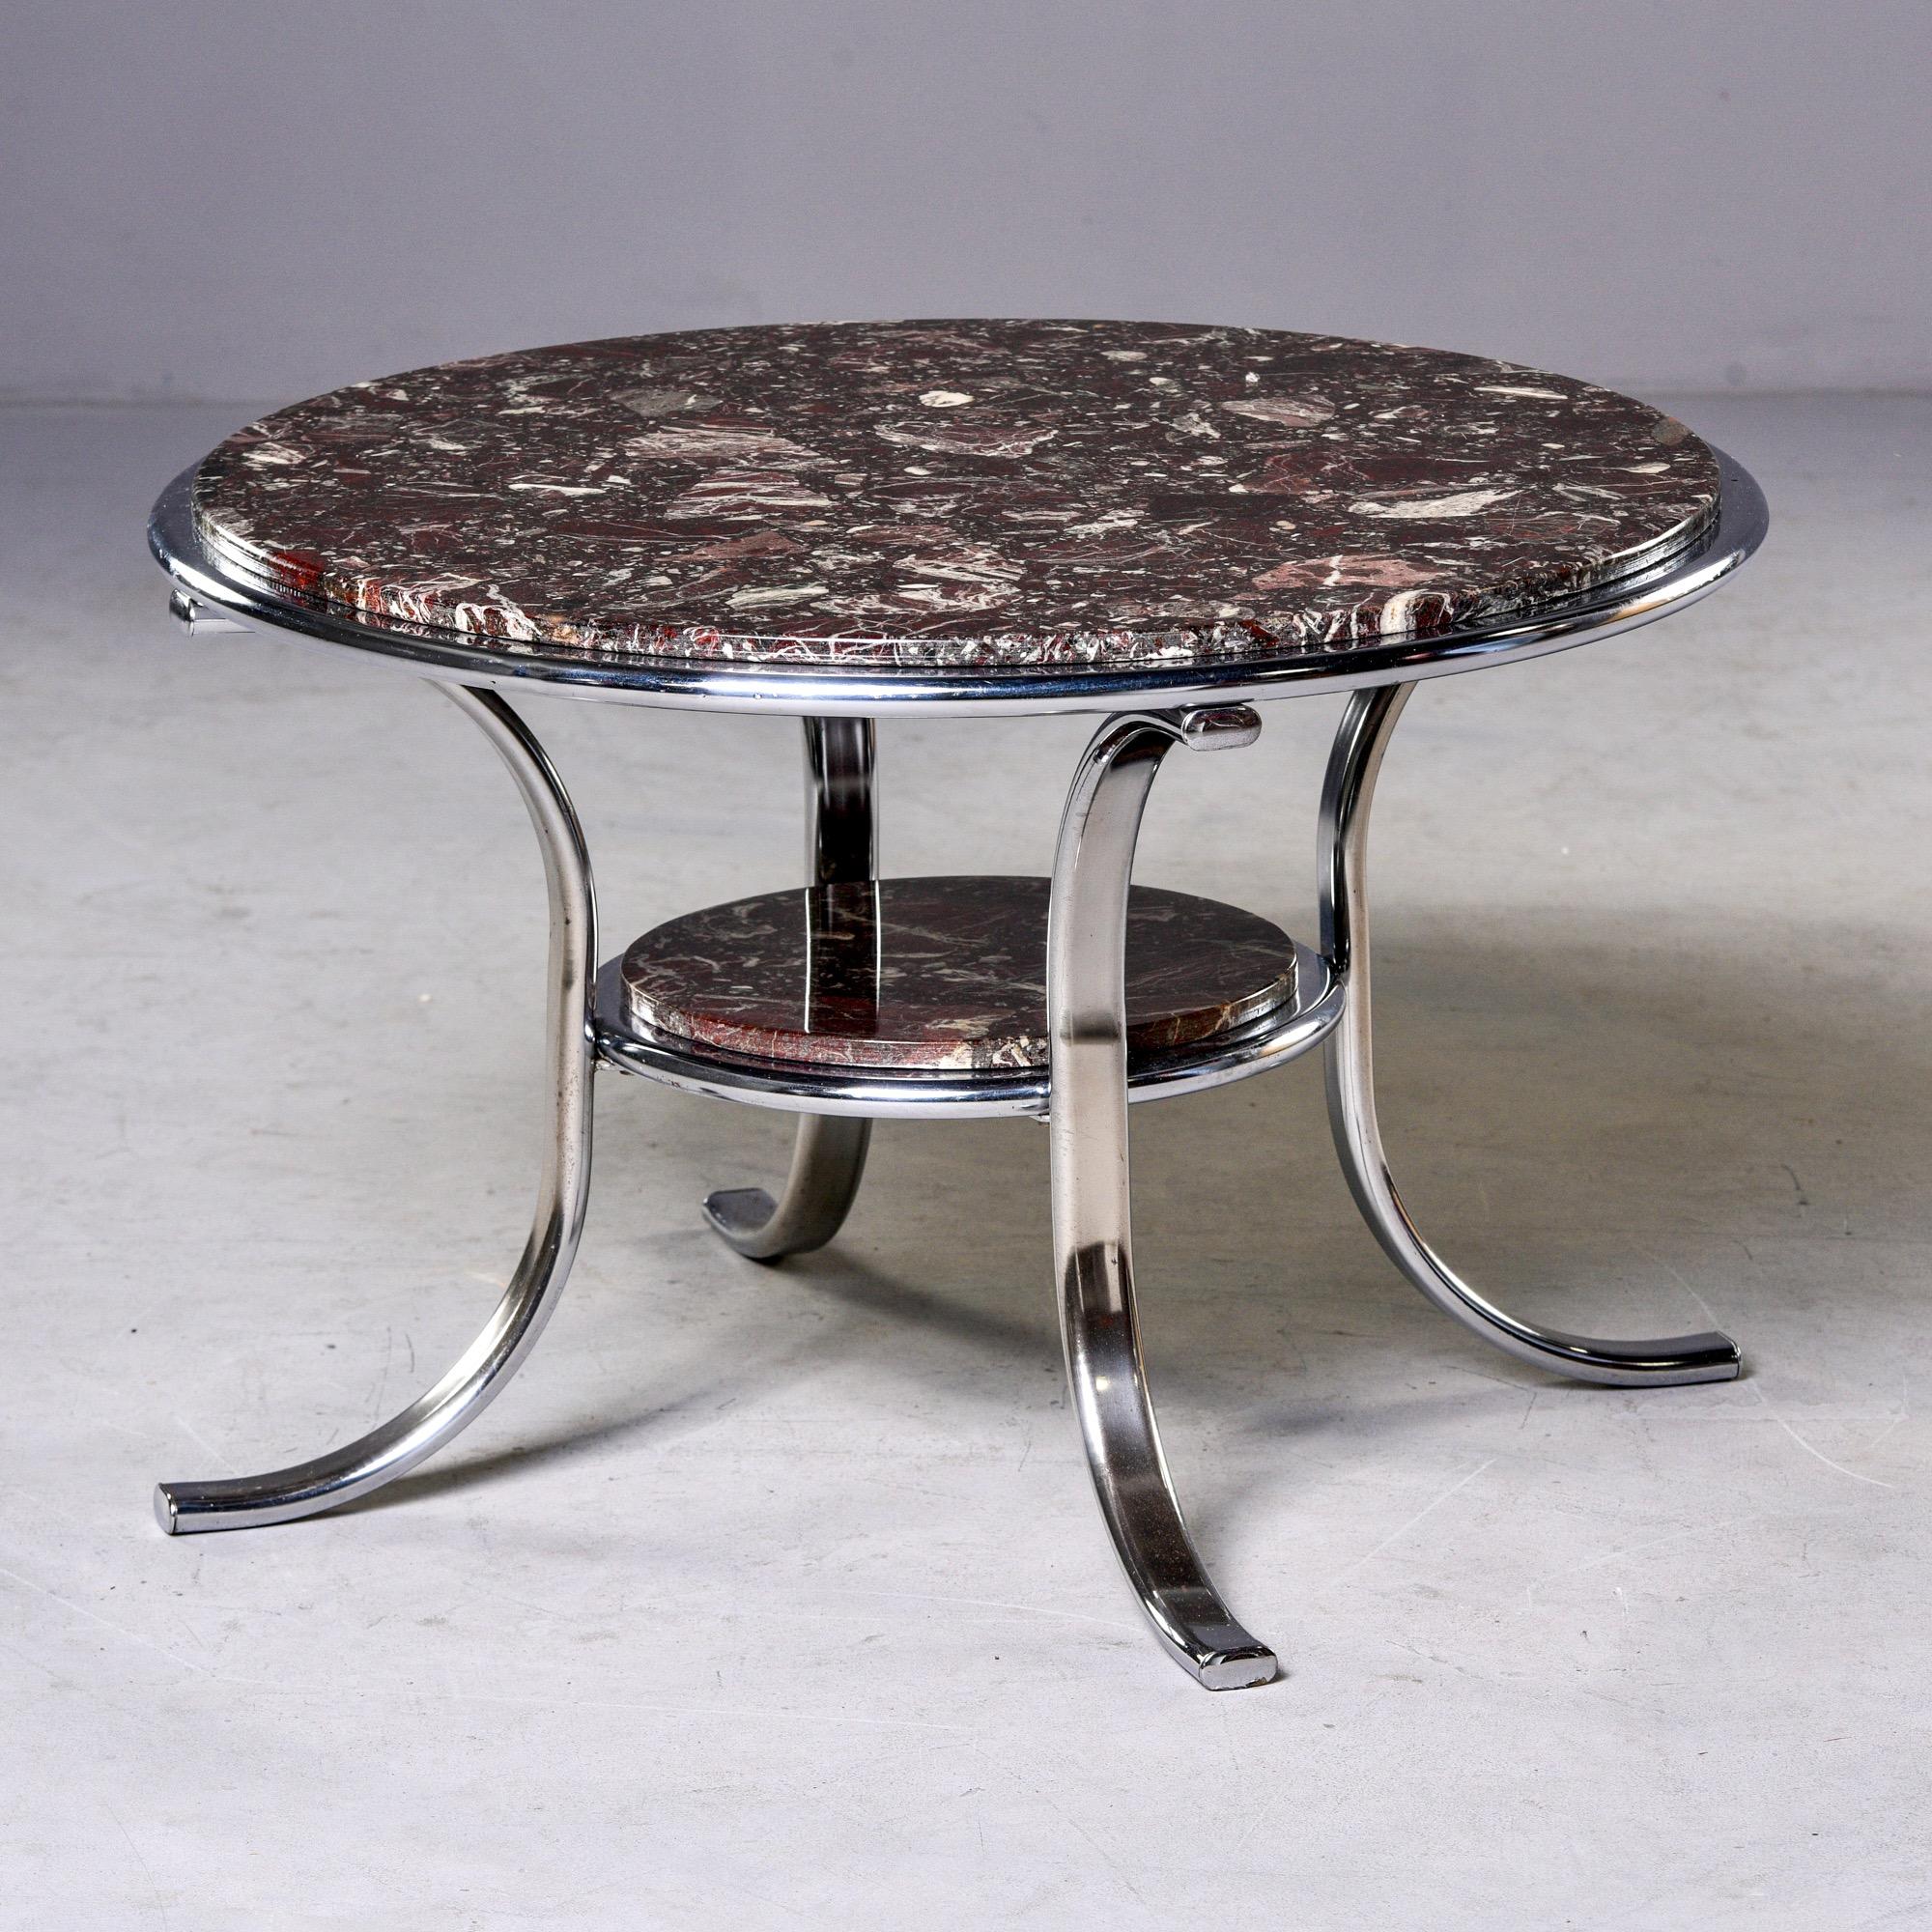 Found in England, this circa 1970s cocktail table has a polished nickel frame and two round tiers of deep wine, cream and black colored marble inserts. Unknown maker. 

Measures: Bottom shelf 13.75” x 9.5”.